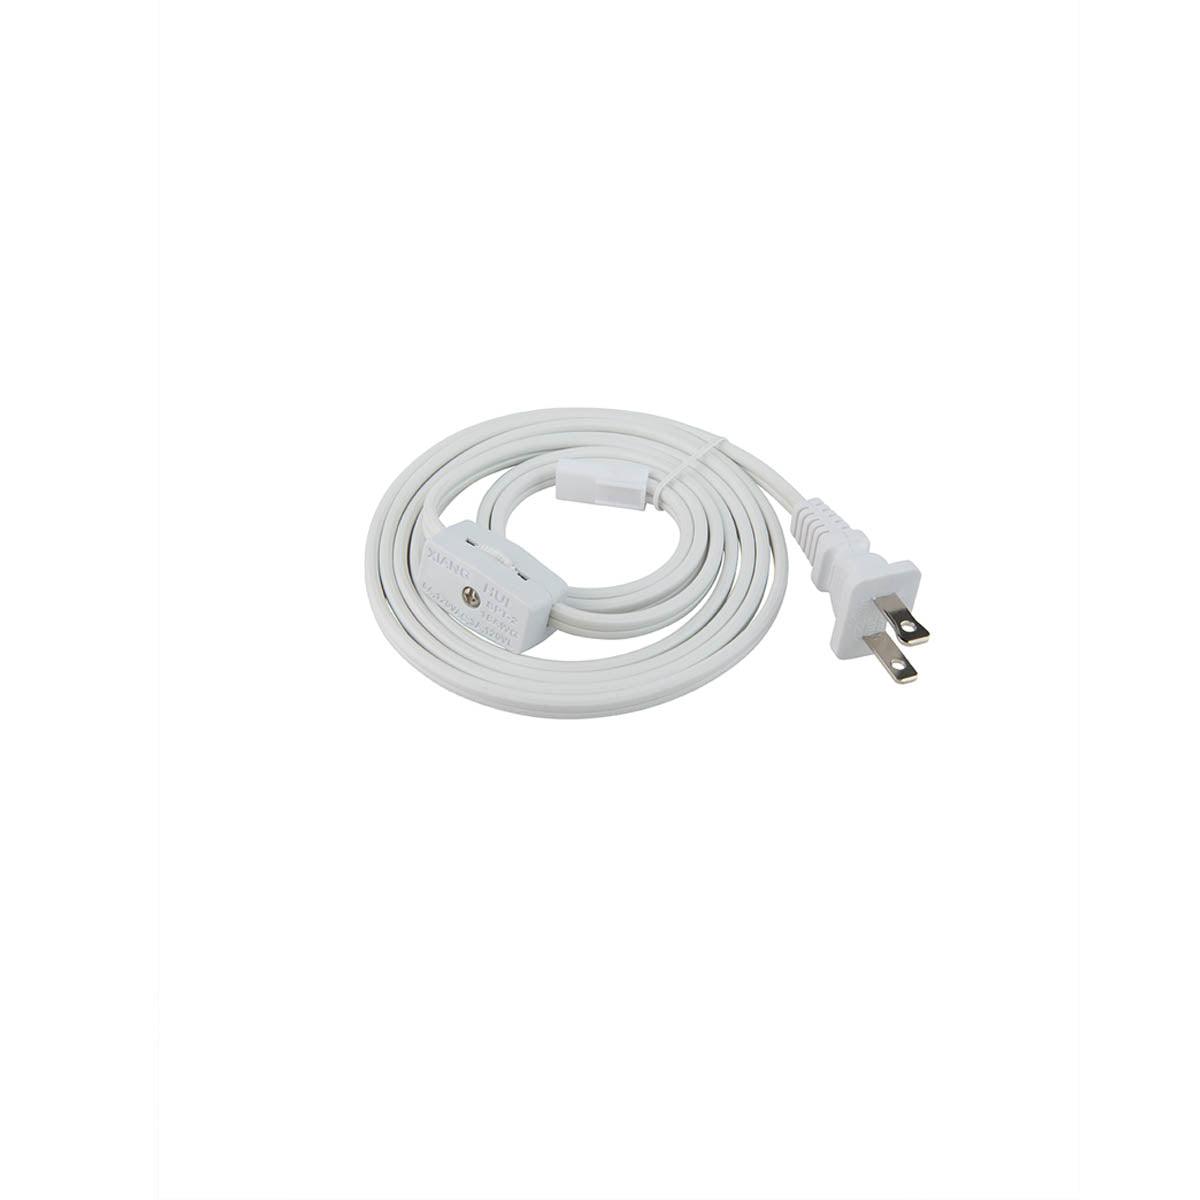 White Power Cord for 3-CCT Puck Light with on/off switch - Bees Lighting